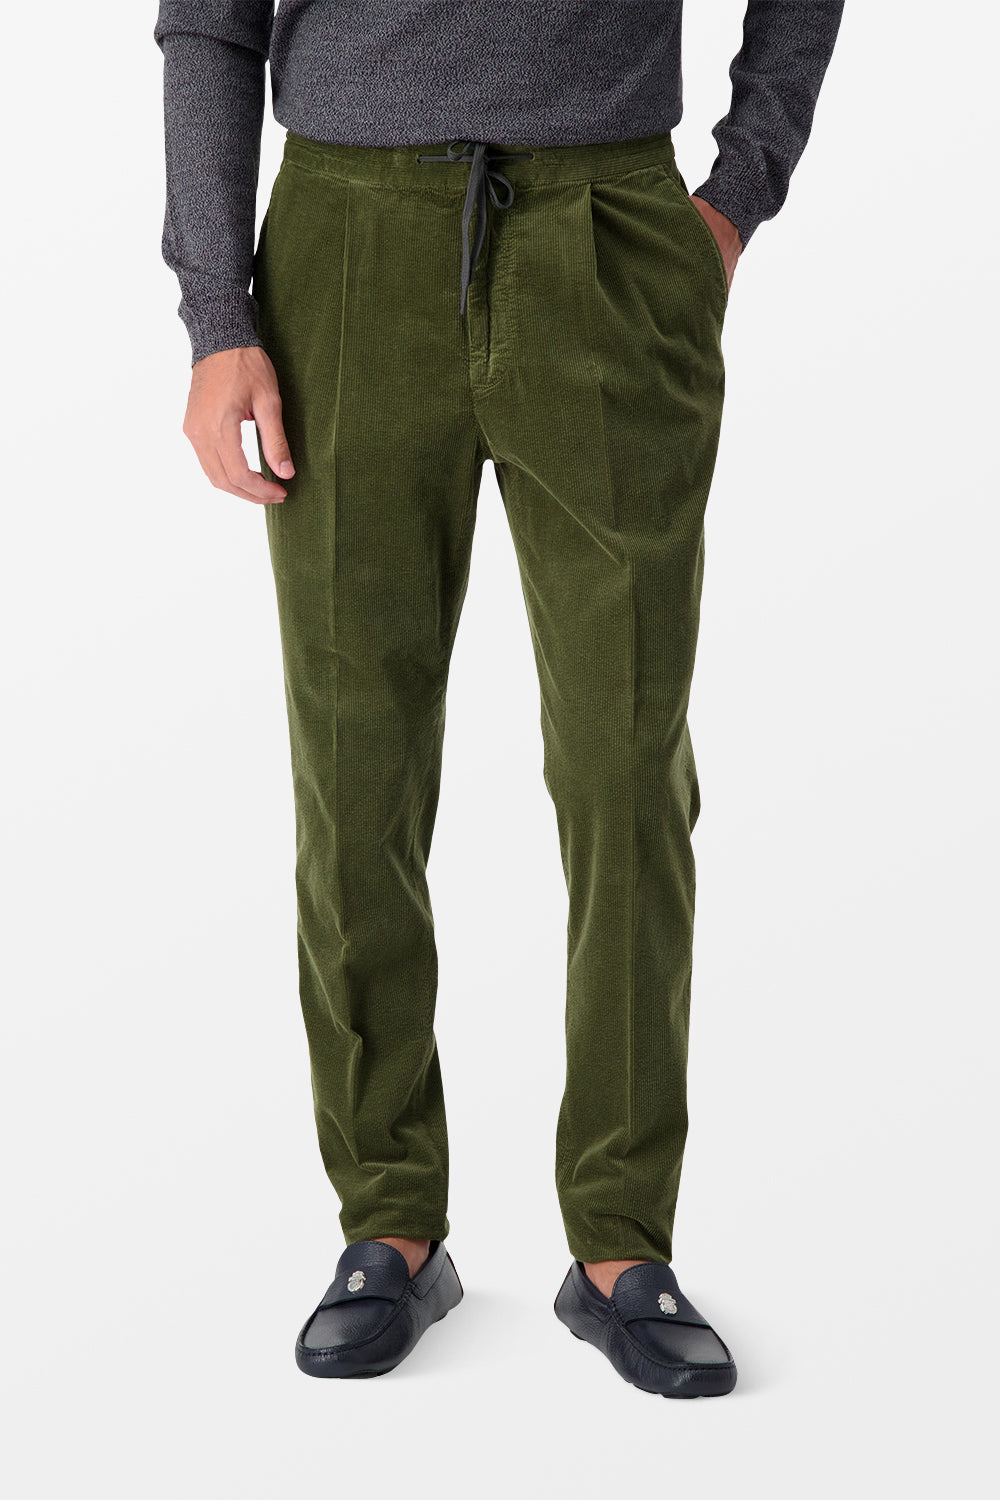 Shop Branded Luxury Men's Trousers From Top Designers